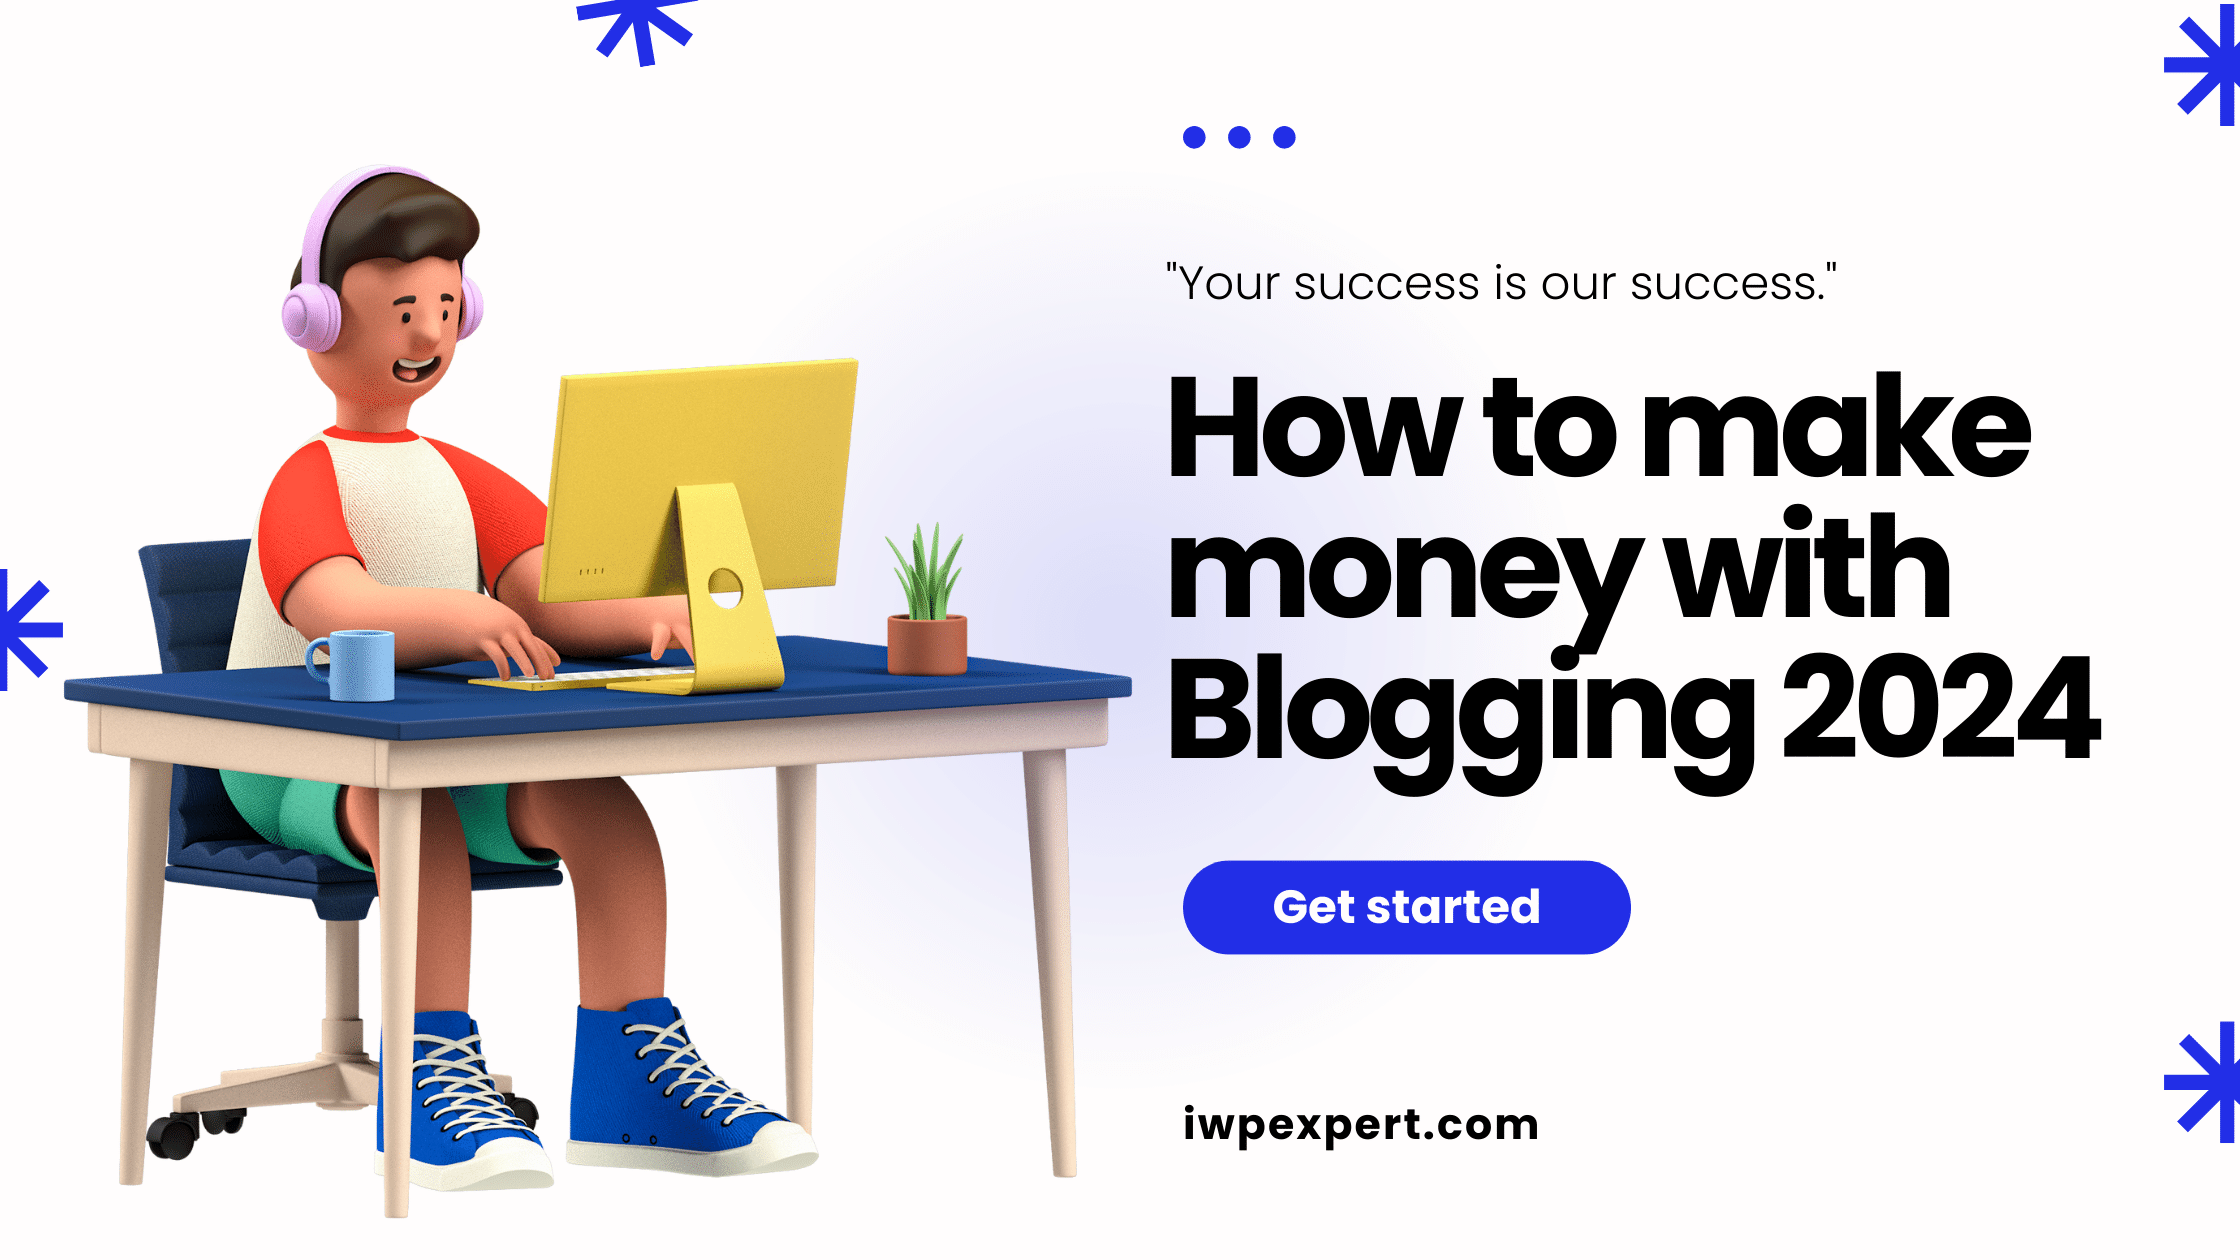 How to make money with Blogging 2024